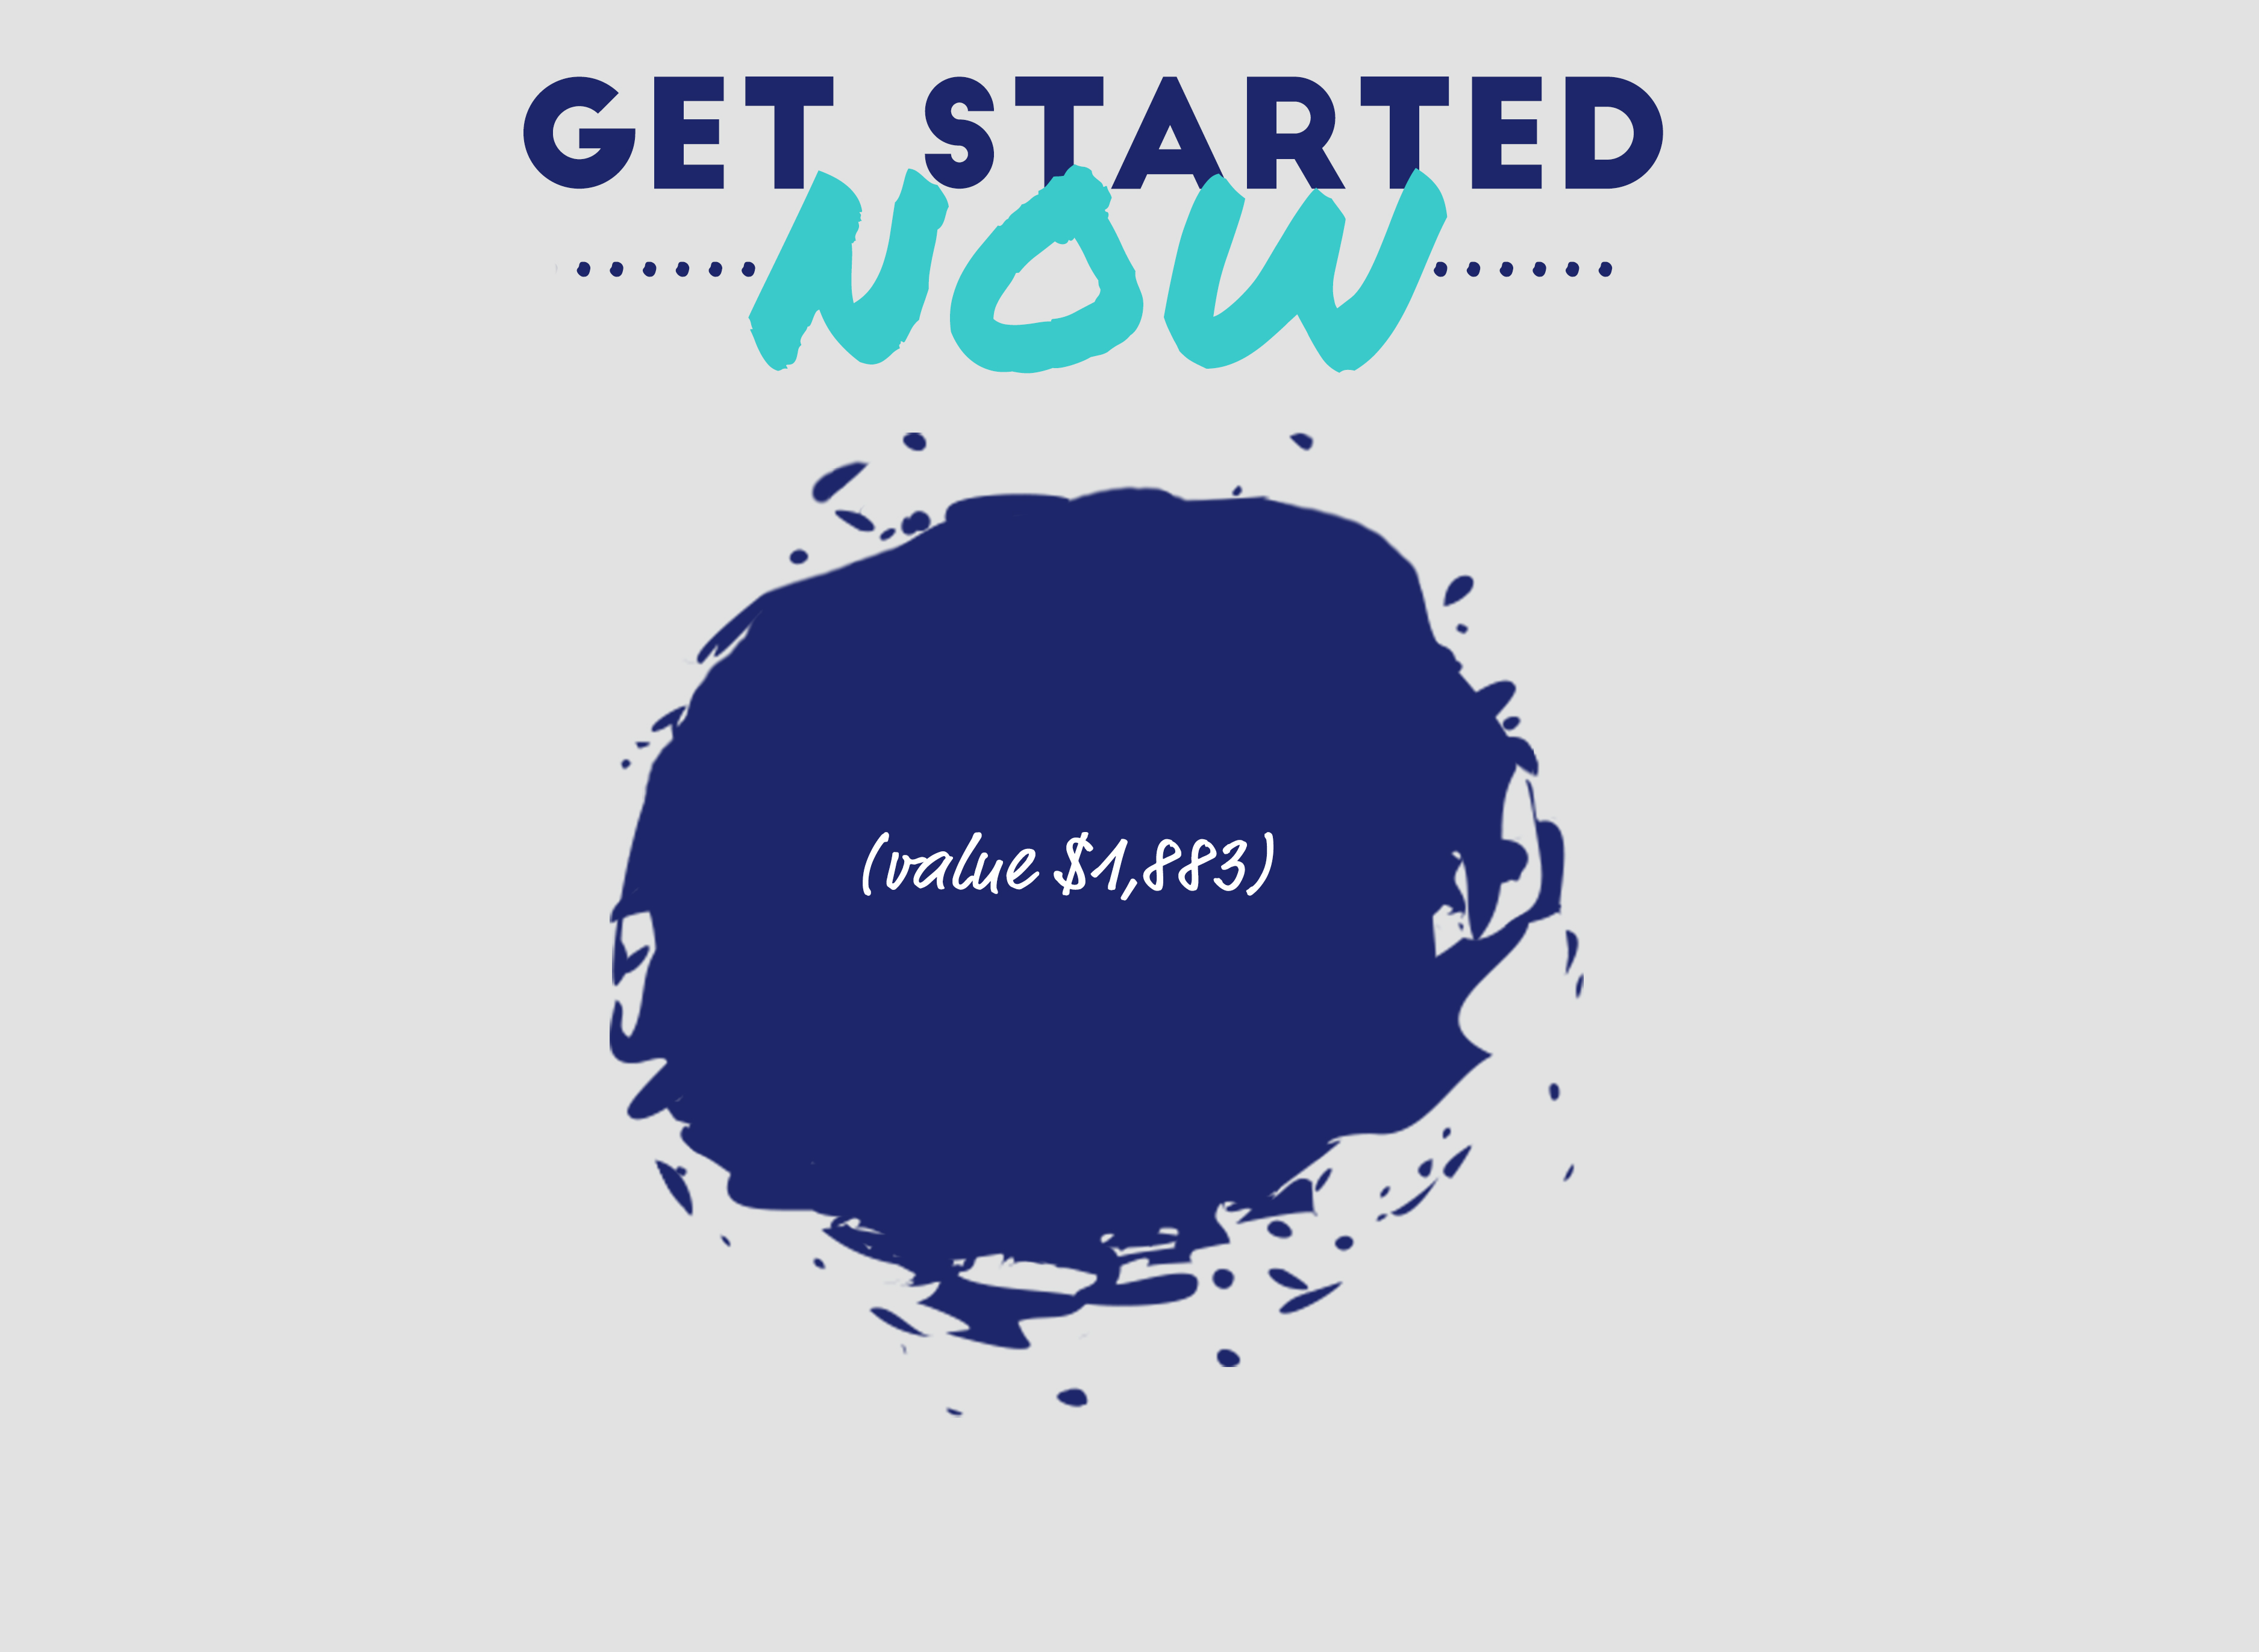 Get Started NOW: (value $1,883)